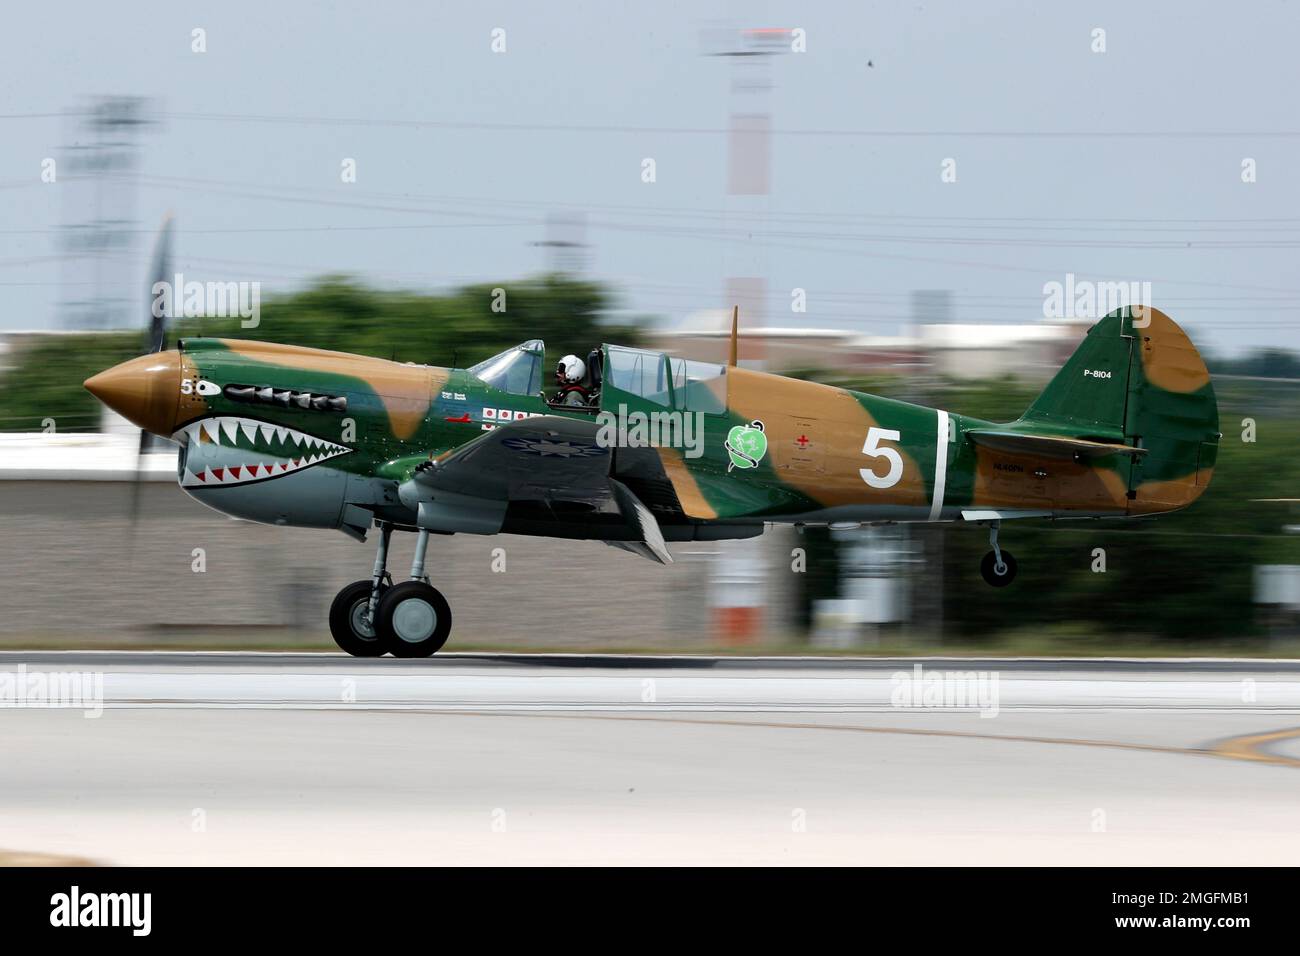 A vintage war aircraft from the Cavanaugh Flight Museum lands at Addison  Airport in Addison, Texas, Friday, May 22, 2020. The aircraft along with  other vintage war birds flew over several medical